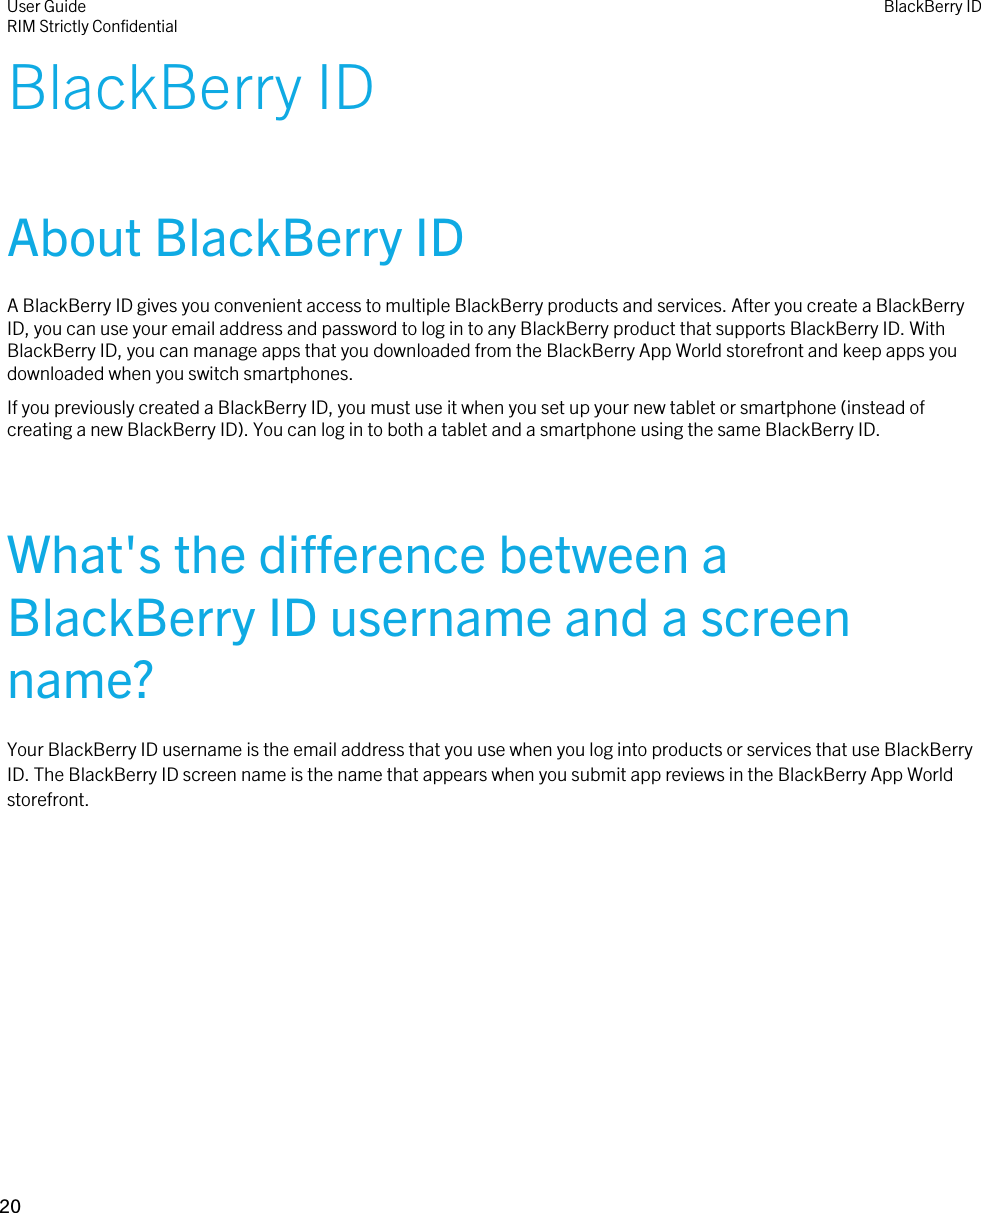 BlackBerry IDAbout BlackBerry IDA BlackBerry ID gives you convenient access to multiple BlackBerry products and services. After you create a BlackBerry ID, you can use your email address and password to log in to any BlackBerry product that supports BlackBerry ID. With BlackBerry ID, you can manage apps that you downloaded from the BlackBerry App World storefront and keep apps you downloaded when you switch smartphones.If you previously created a BlackBerry ID, you must use it when you set up your new tablet or smartphone (instead of creating a new BlackBerry ID). You can log in to both a tablet and a smartphone using the same BlackBerry ID.What&apos;s the difference between a BlackBerry ID username and a screen name?Your BlackBerry ID username is the email address that you use when you log into products or services that use BlackBerry ID. The BlackBerry ID screen name is the name that appears when you submit app reviews in the BlackBerry App World storefront.User GuideRIM Strictly Confidential BlackBerry ID20 